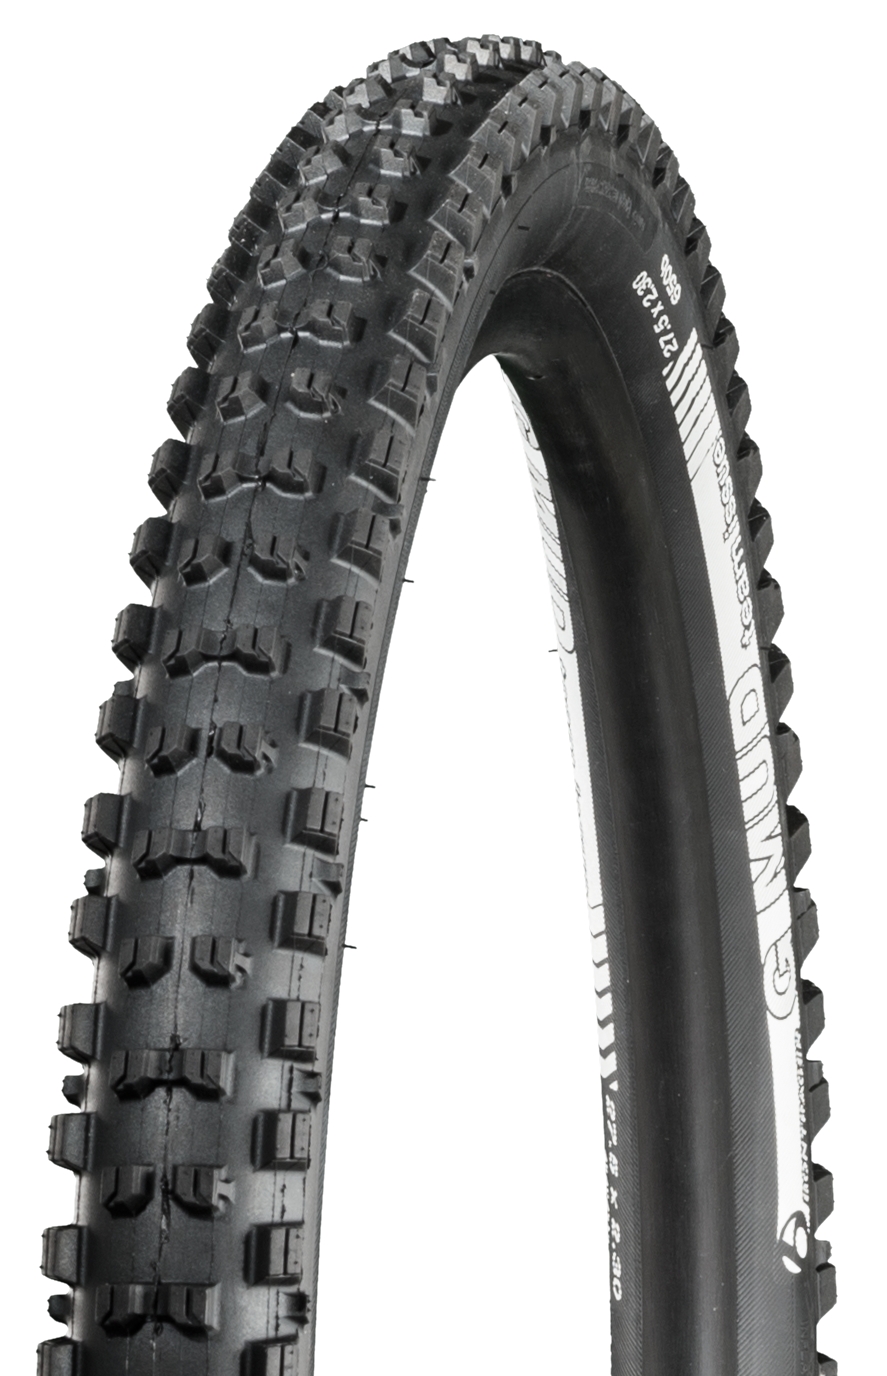 trail king protection apex